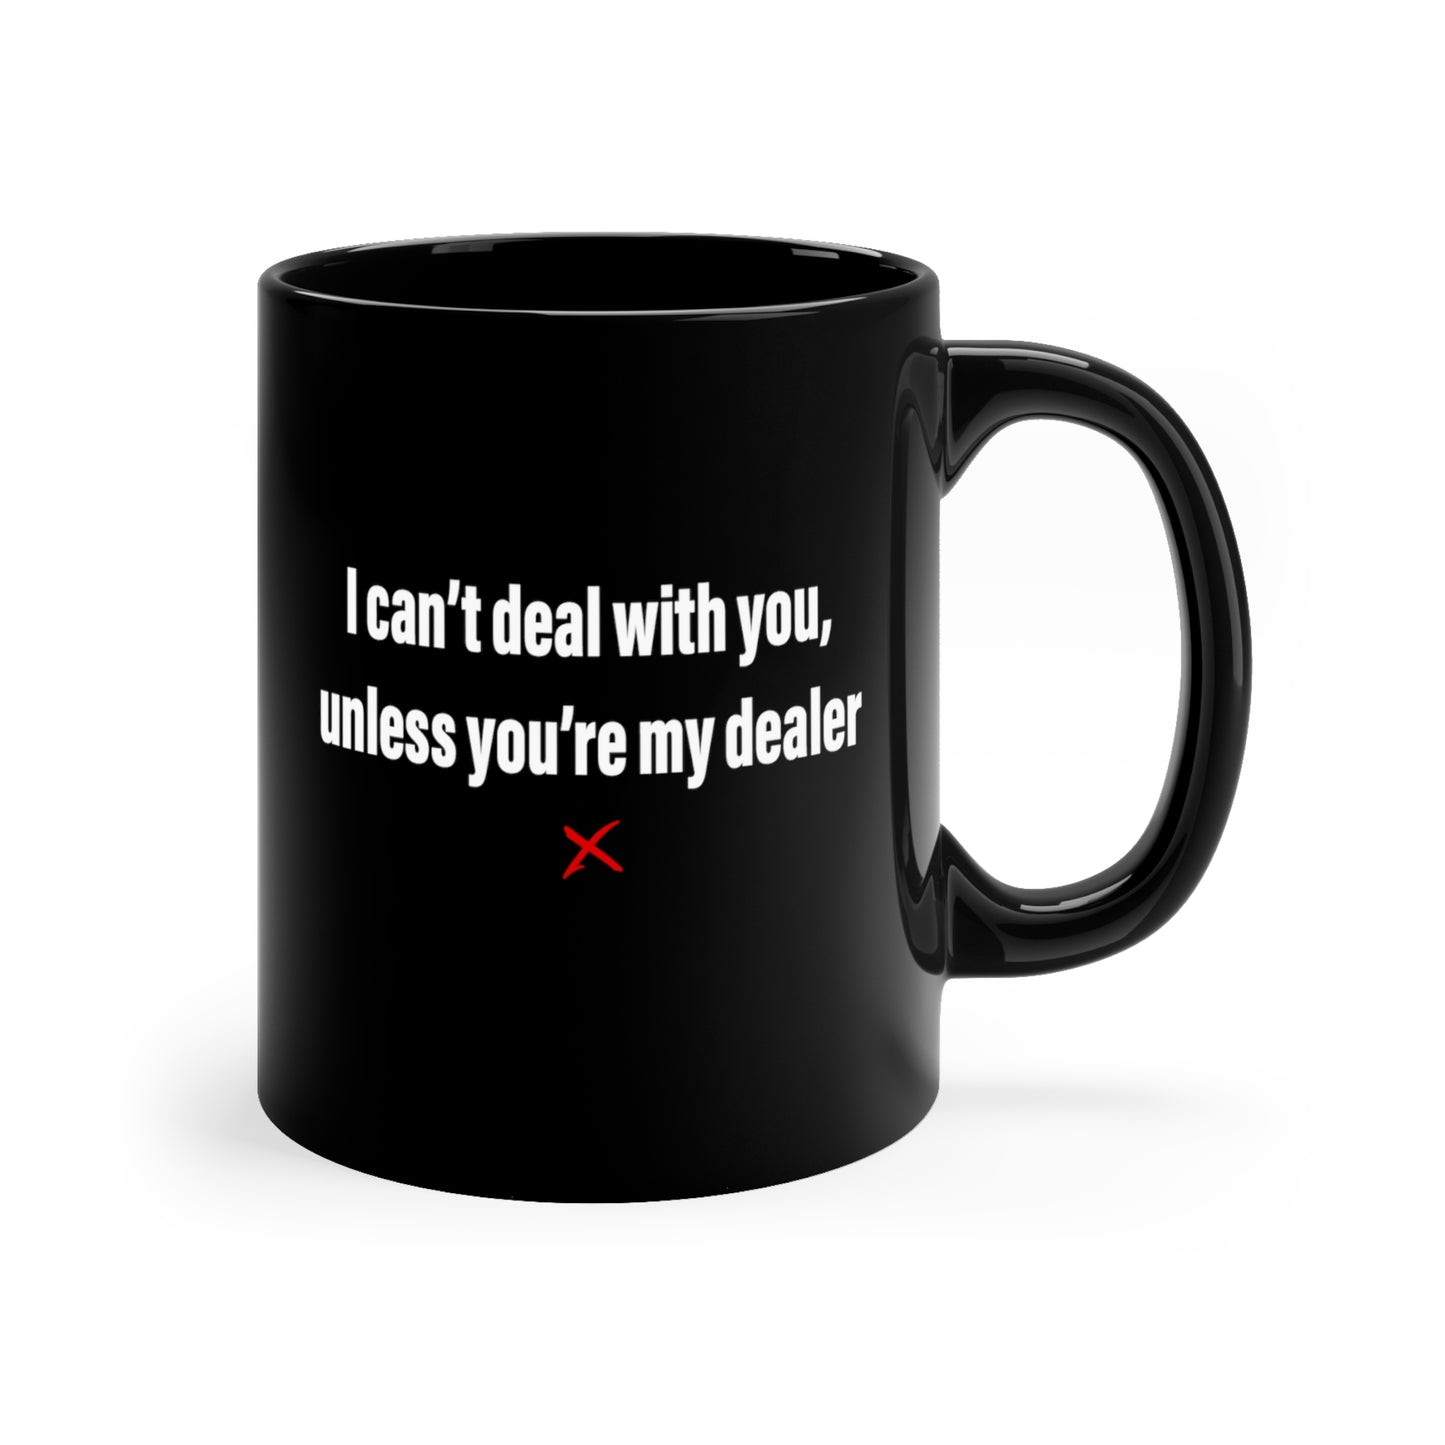 I can't deal with you, unless you're my dealer - Mug